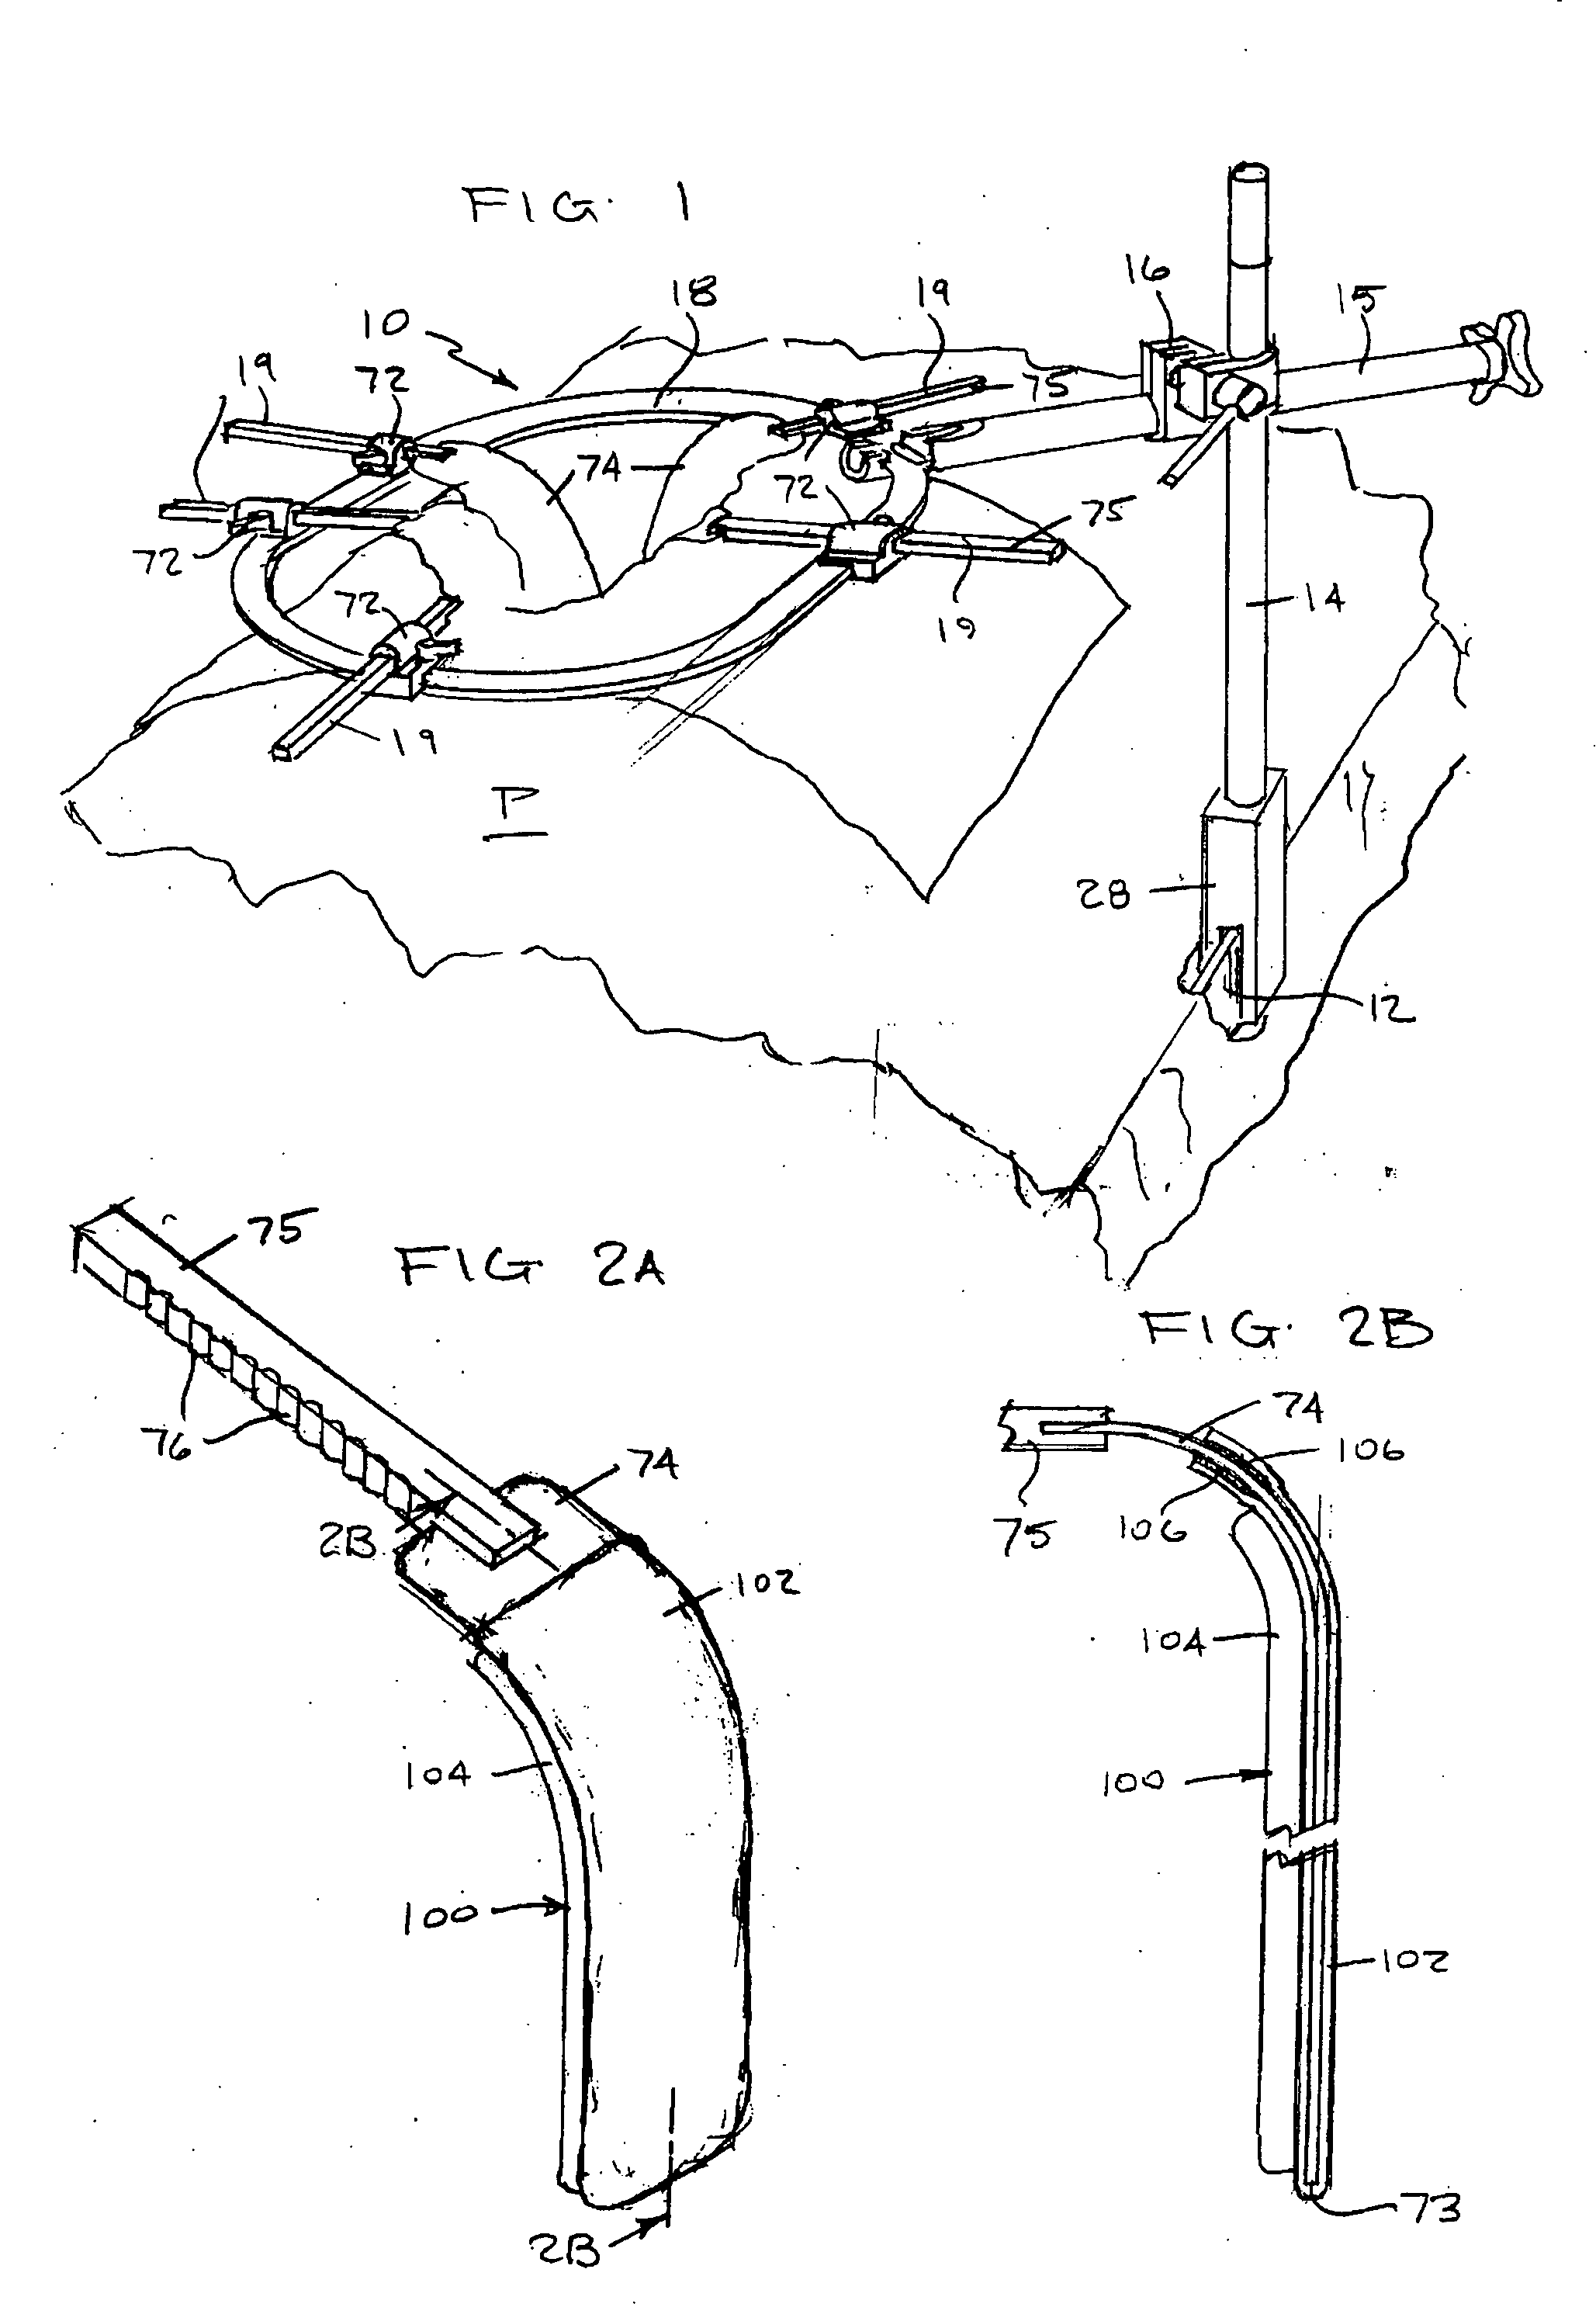 Disposable padding for a self-retaining retraction device